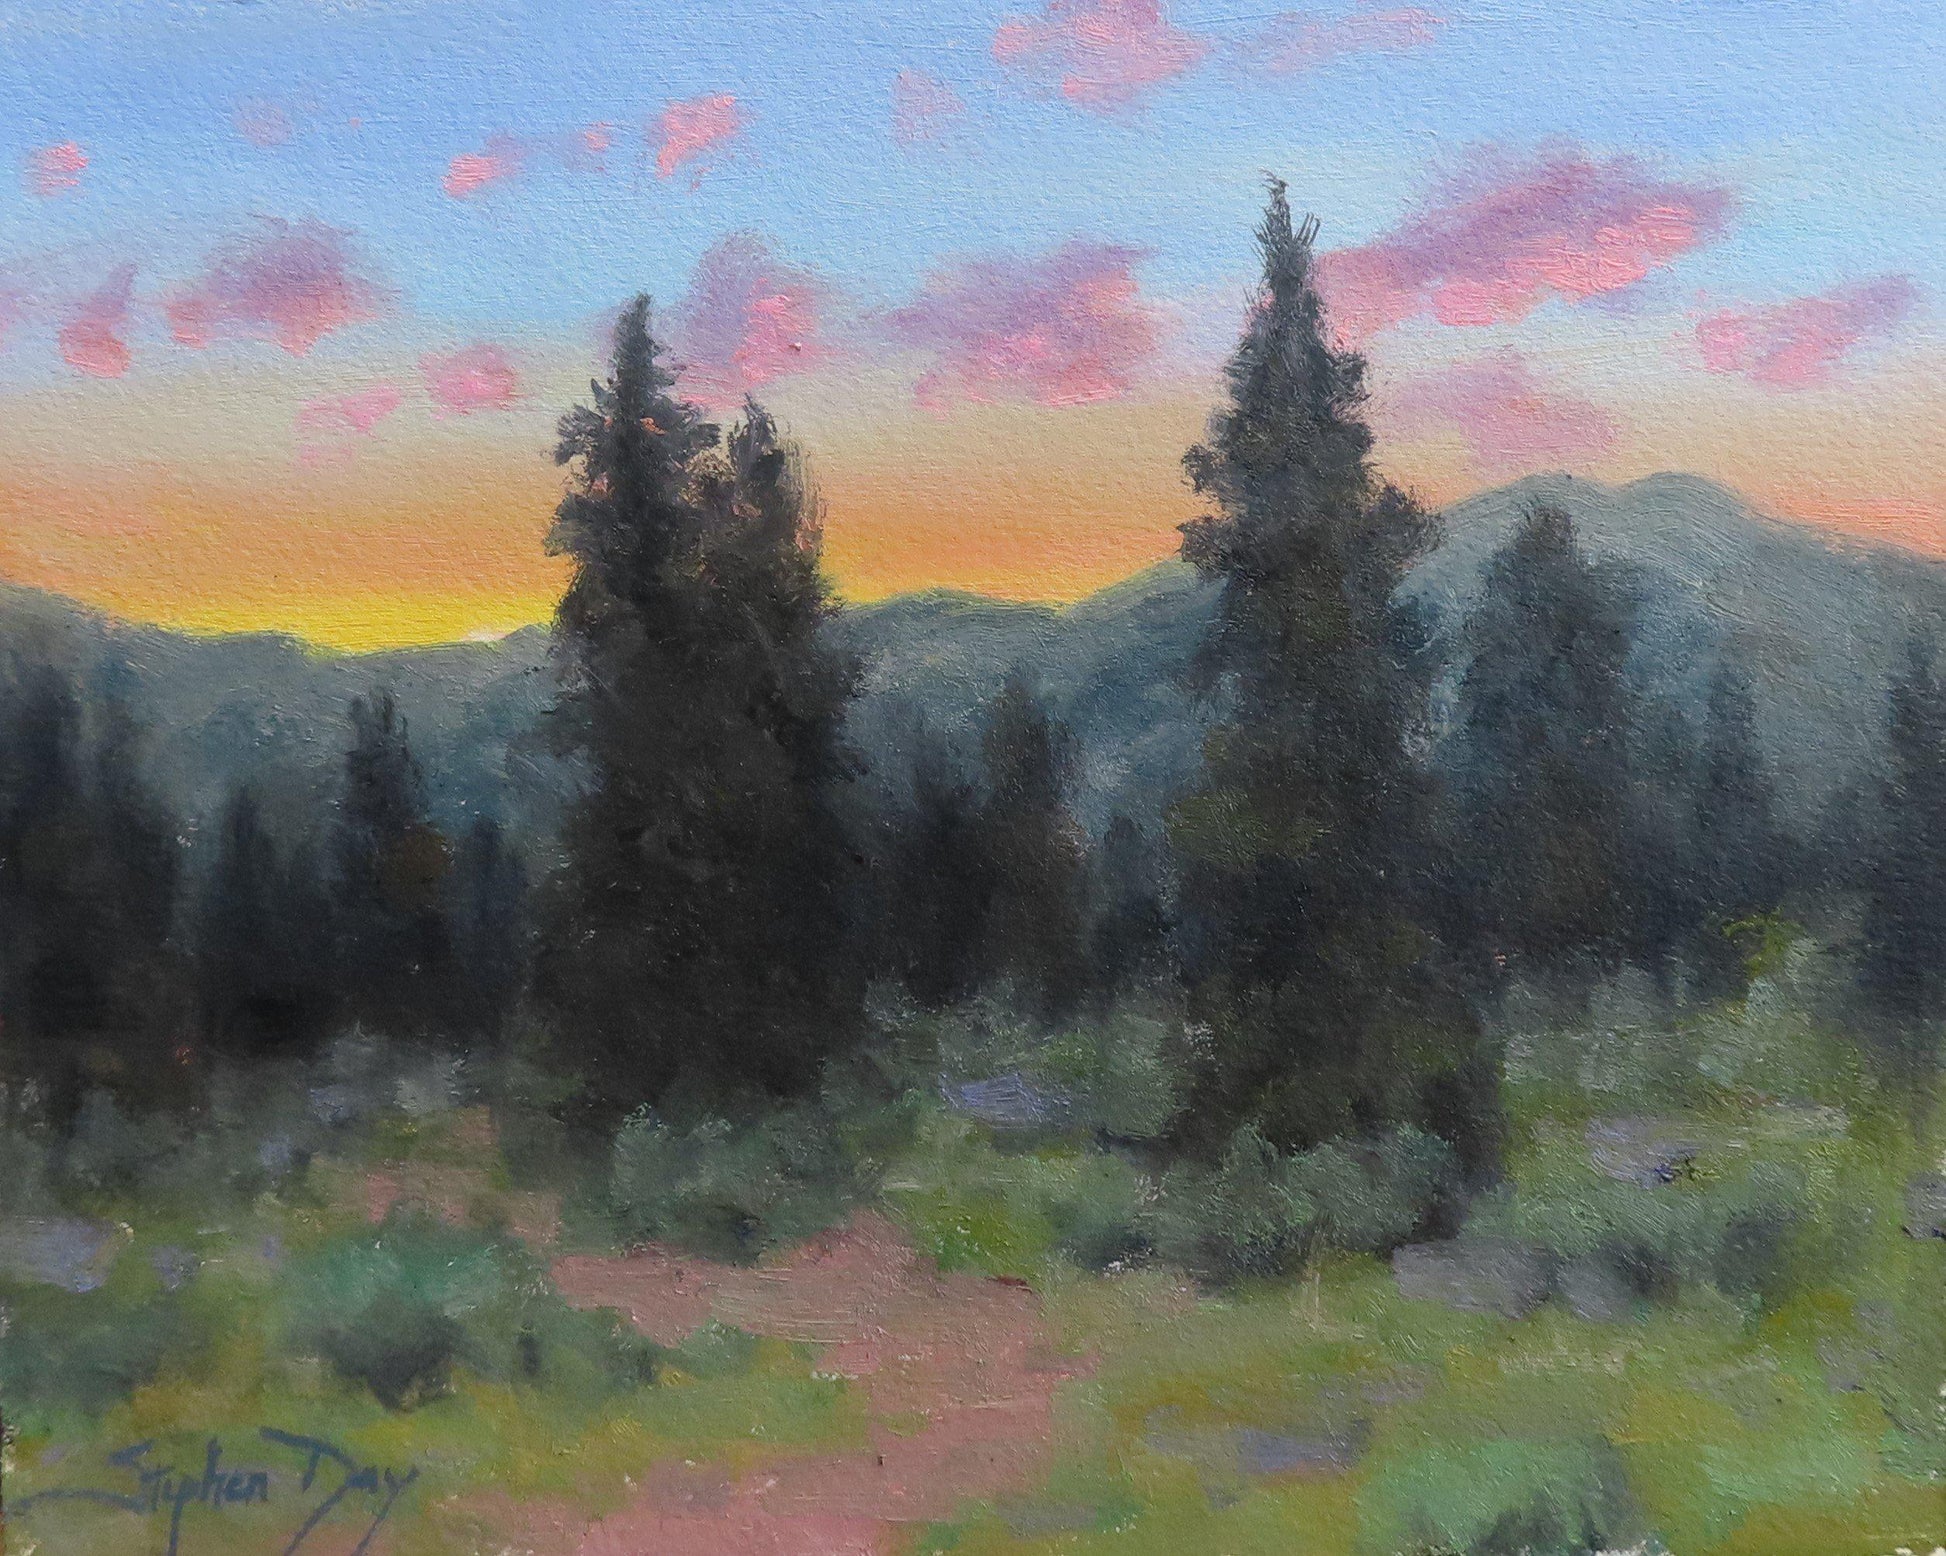 Sunset in the Mountains-Painting-Stephen Day-Sorrel Sky Gallery